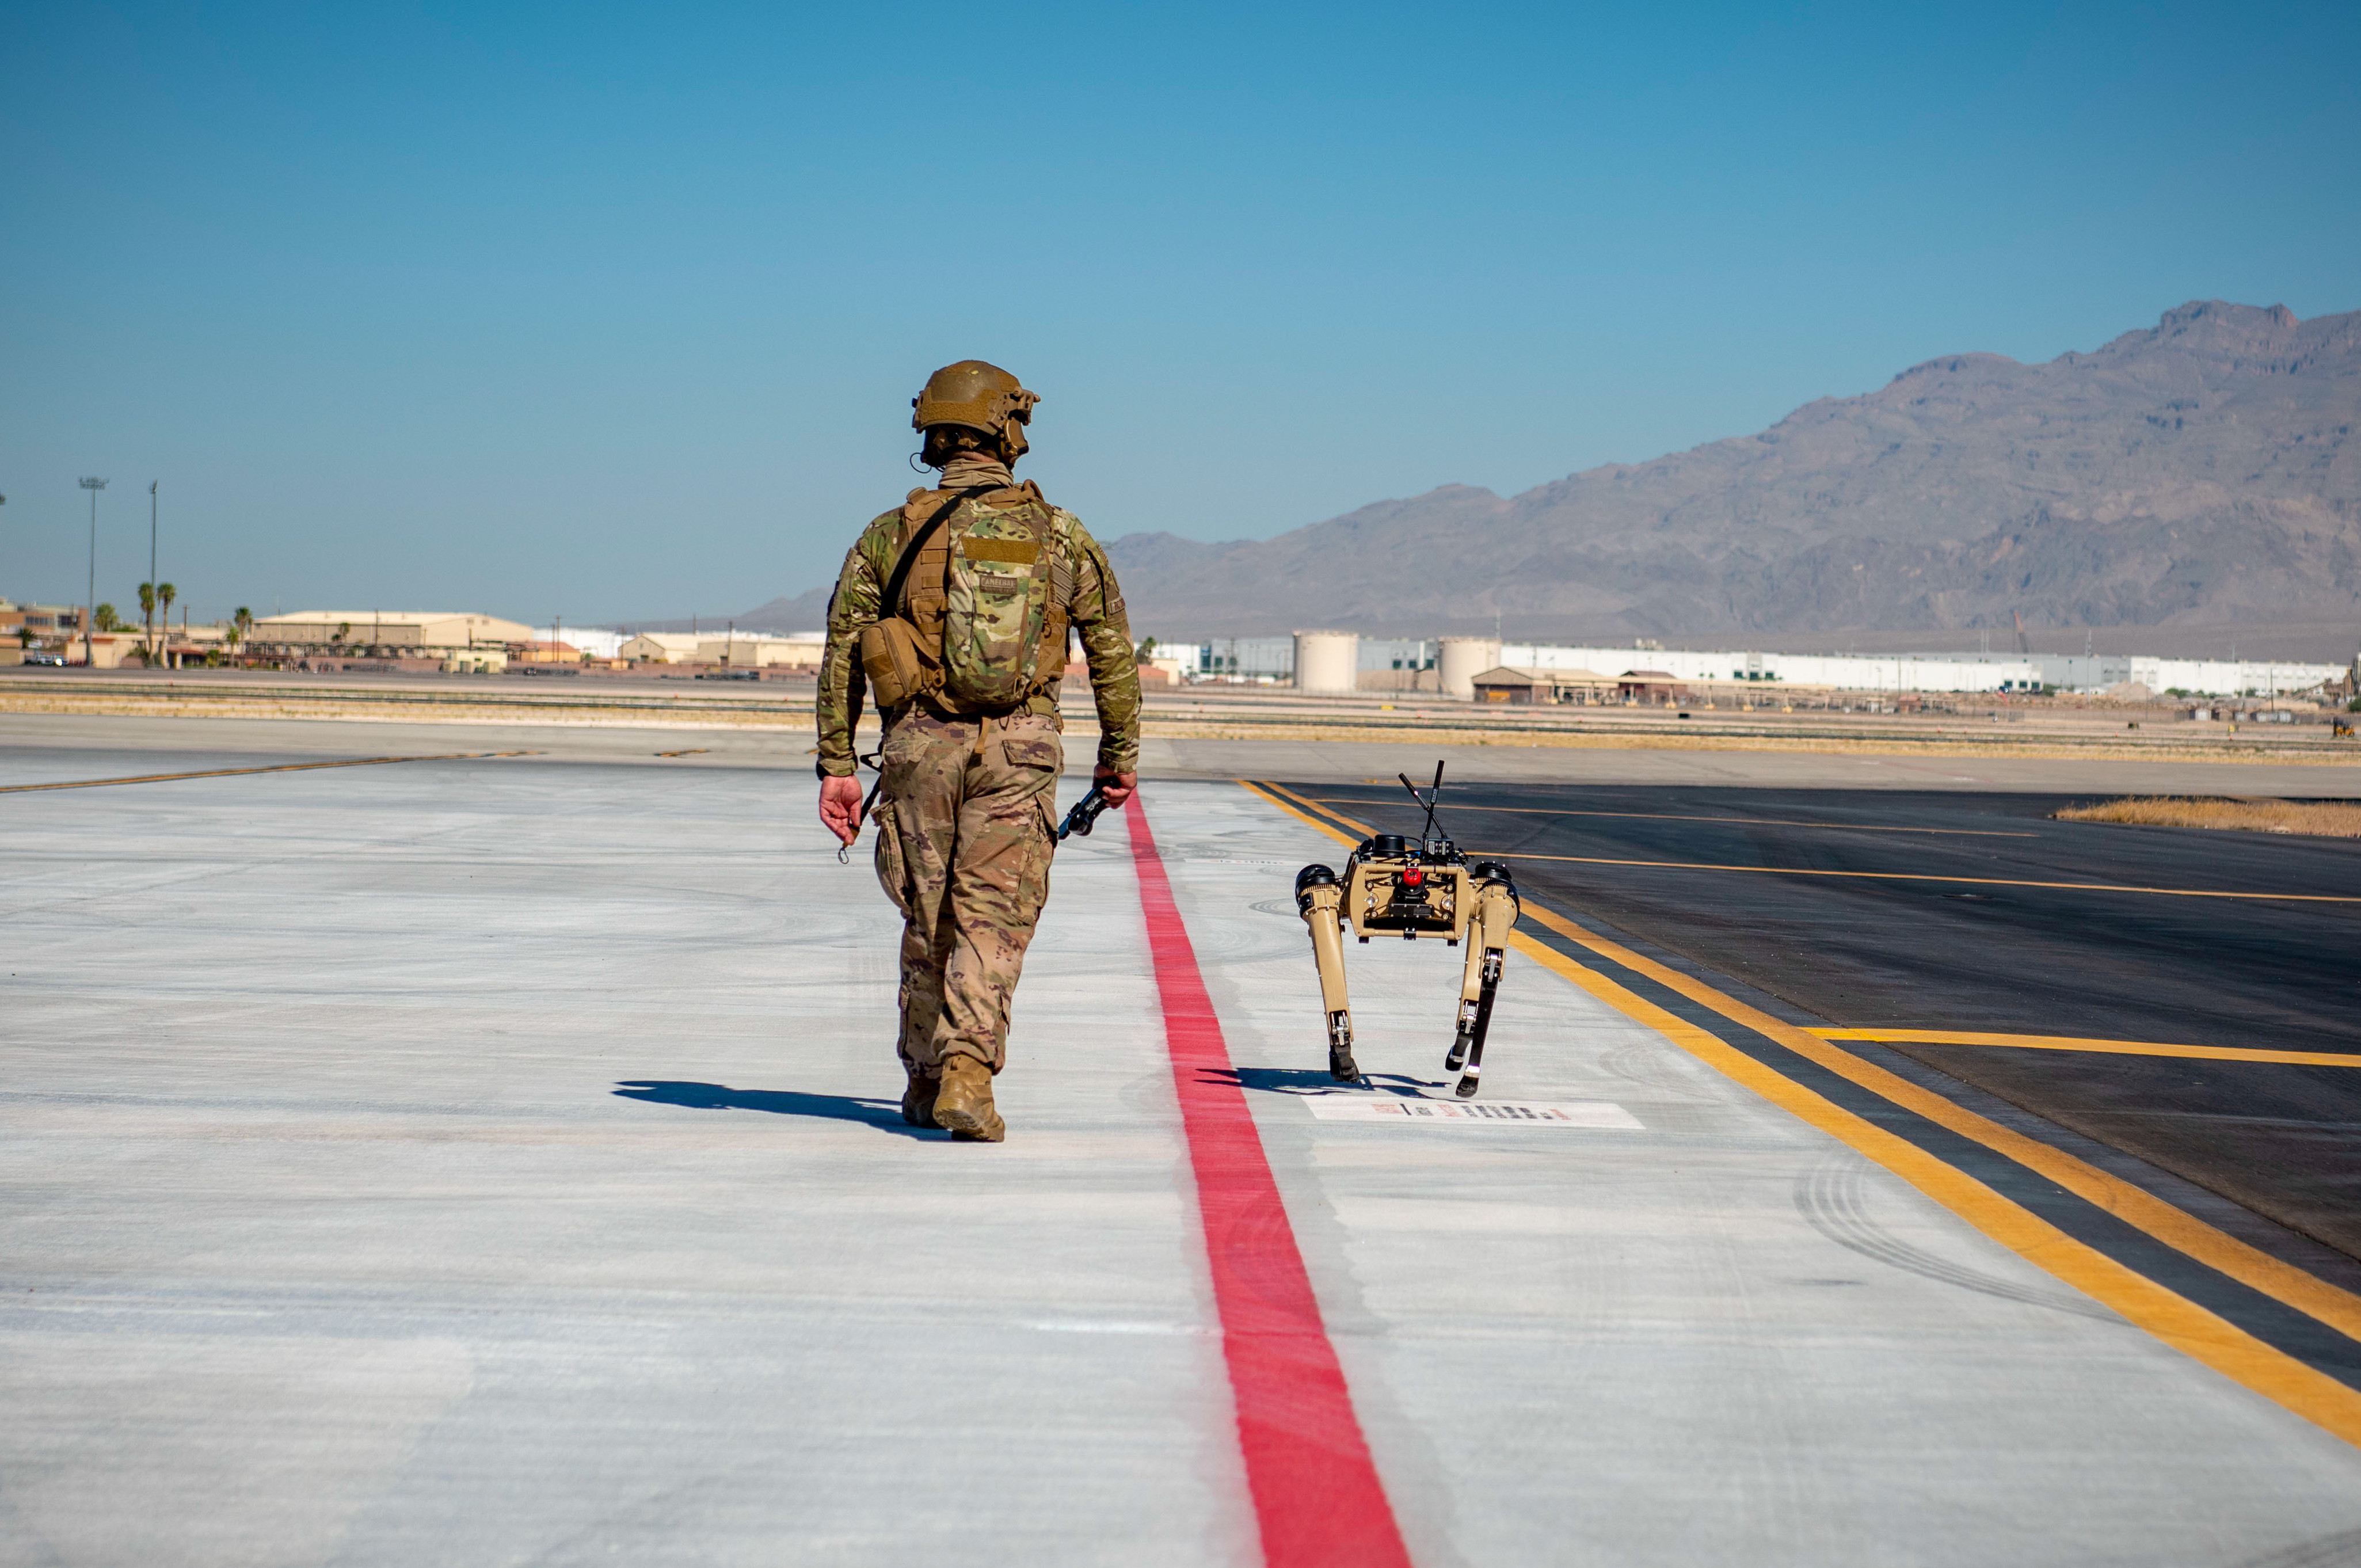 Tech. Sgt. John Rodiguez, 321st Contingency Response Squadron security team, patrols with a Ghost Robotics Vision 60 prototype at a simulated austere base during the Advanced Battle Management System exercise on Nellis Air Force Base, Nev., Sept. 3, 2020. The ABMS is an interconnected battle network - the digital architecture or foundation - which collects, processes and shares data relevant to warfighters in order to make better decisions faster in the kill chain. (photo by Airman First Class Zachary Rufus)